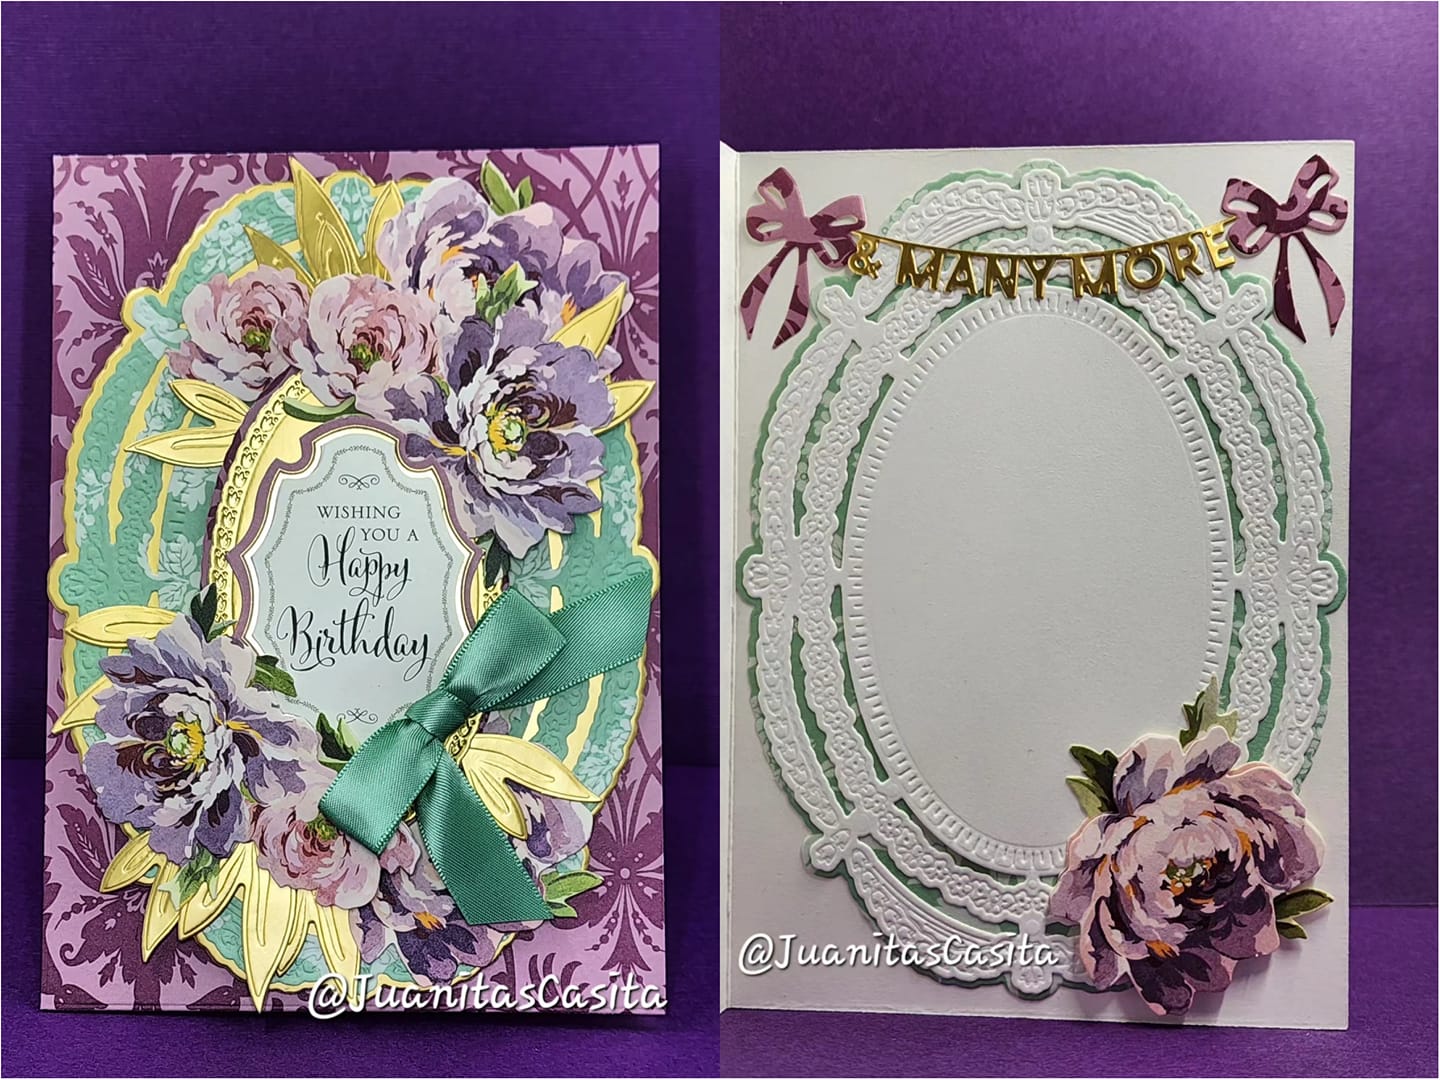 Two cards with flowers and ribbons on them.